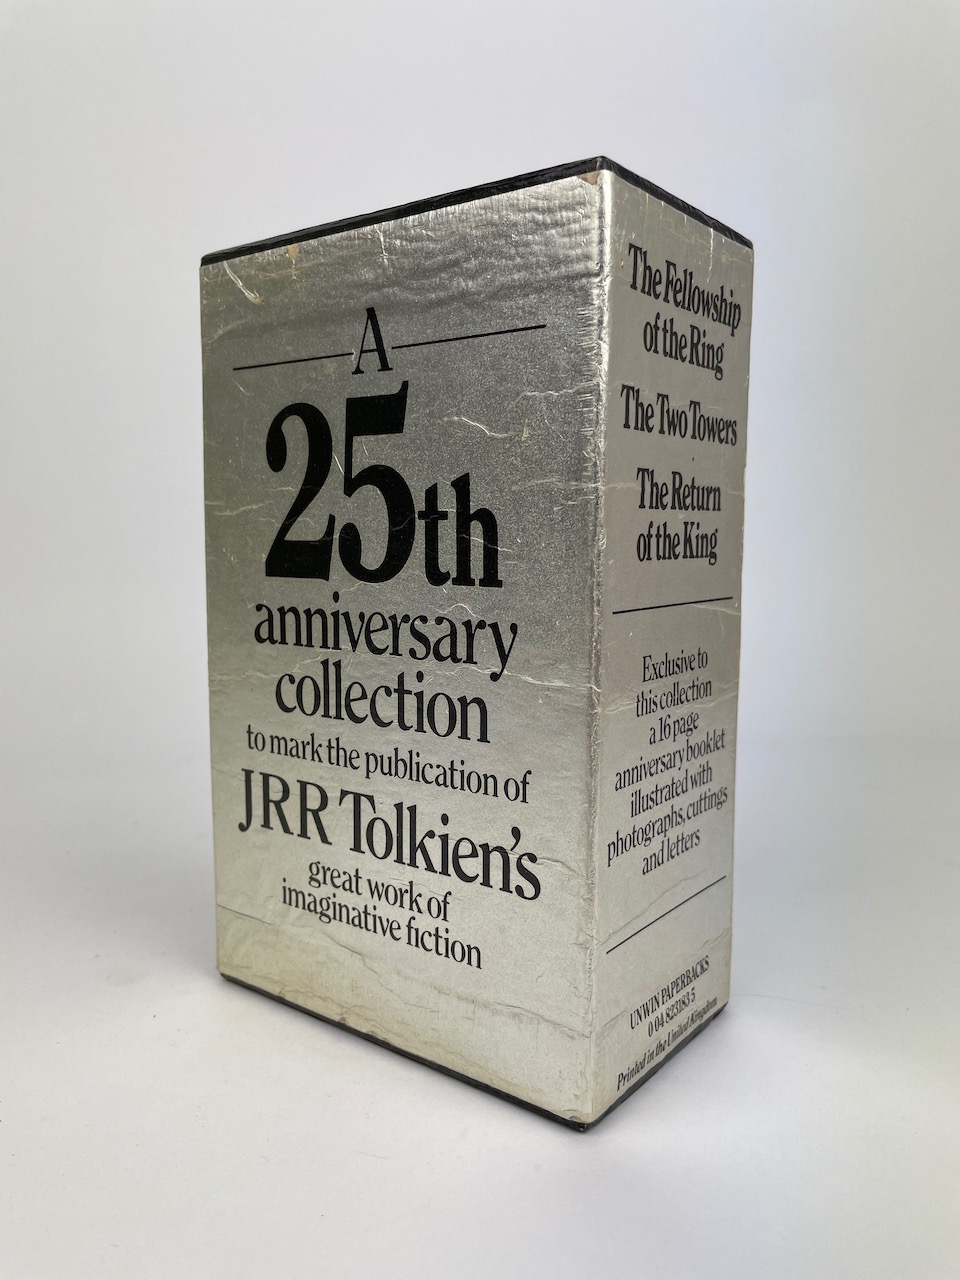 The Lord of the Rings 25th Anniversary Collection from 1980 by Unwin Paperbacks 4